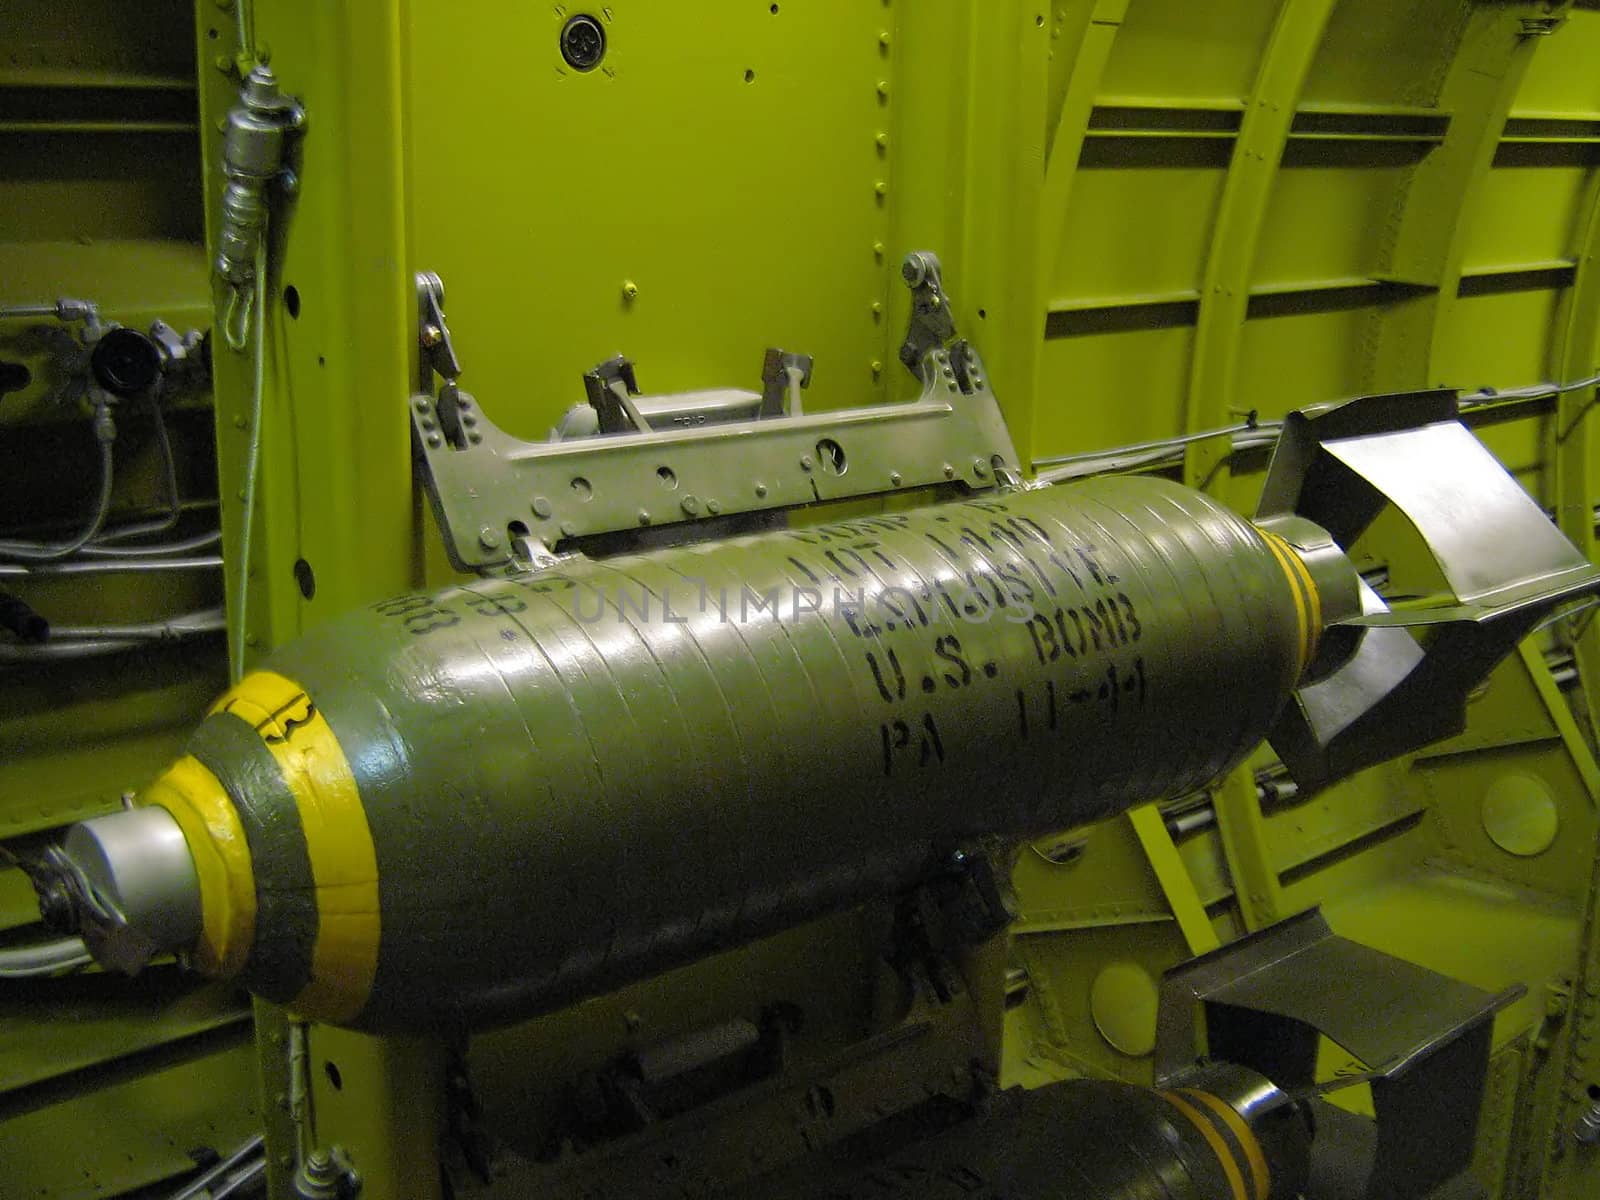 A photograph of a replica bomb used by military aircraft.